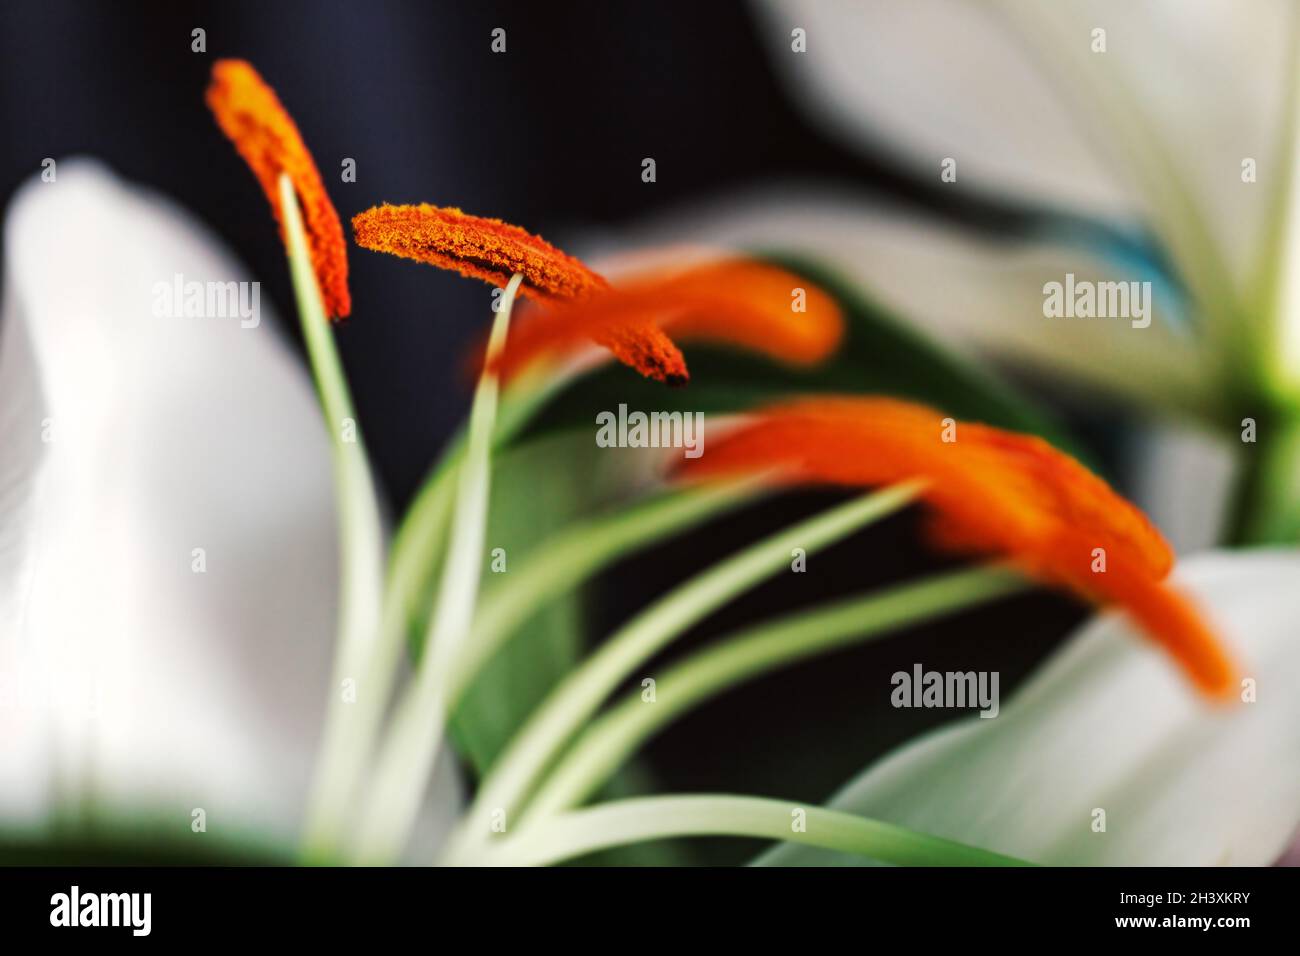 Real close-up orange stamens of white lilies for original mood Stock Photo